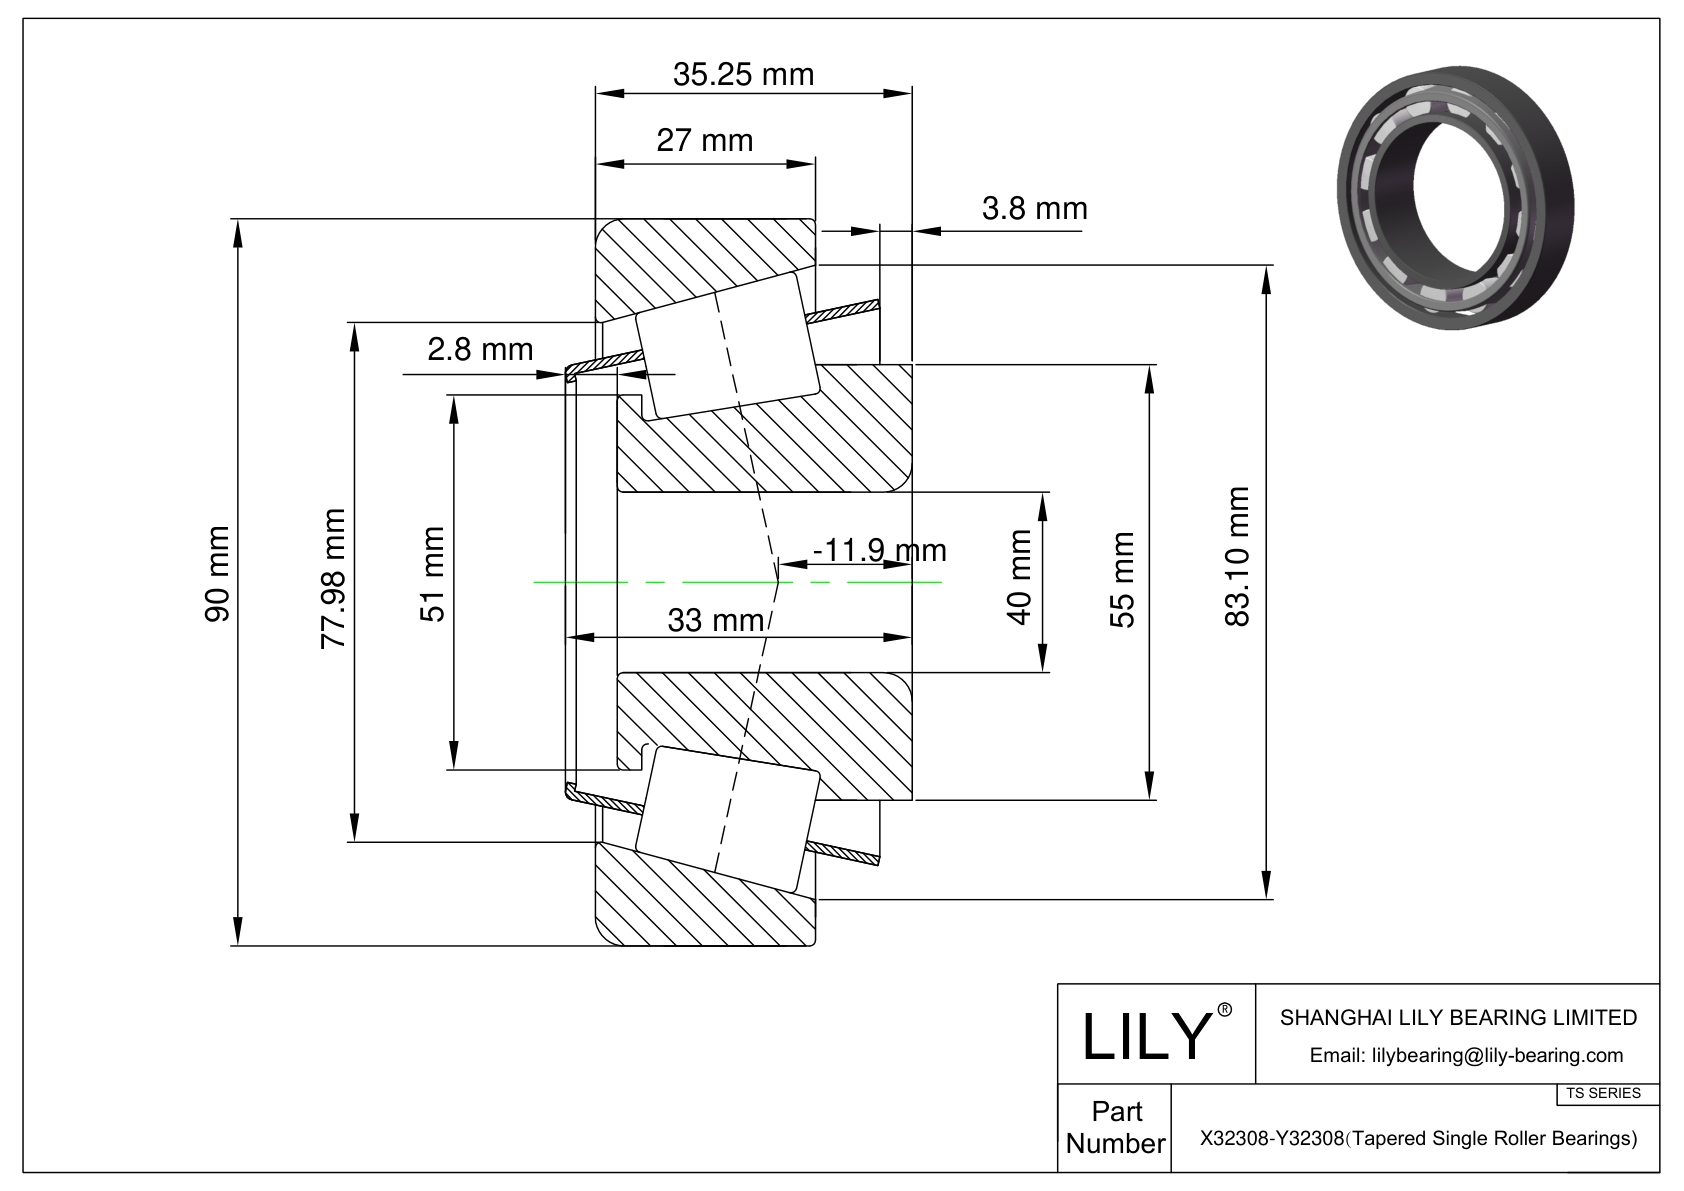 X32308-Y32308 TS (Tapered Single Roller Bearings) (Metric) cad drawing